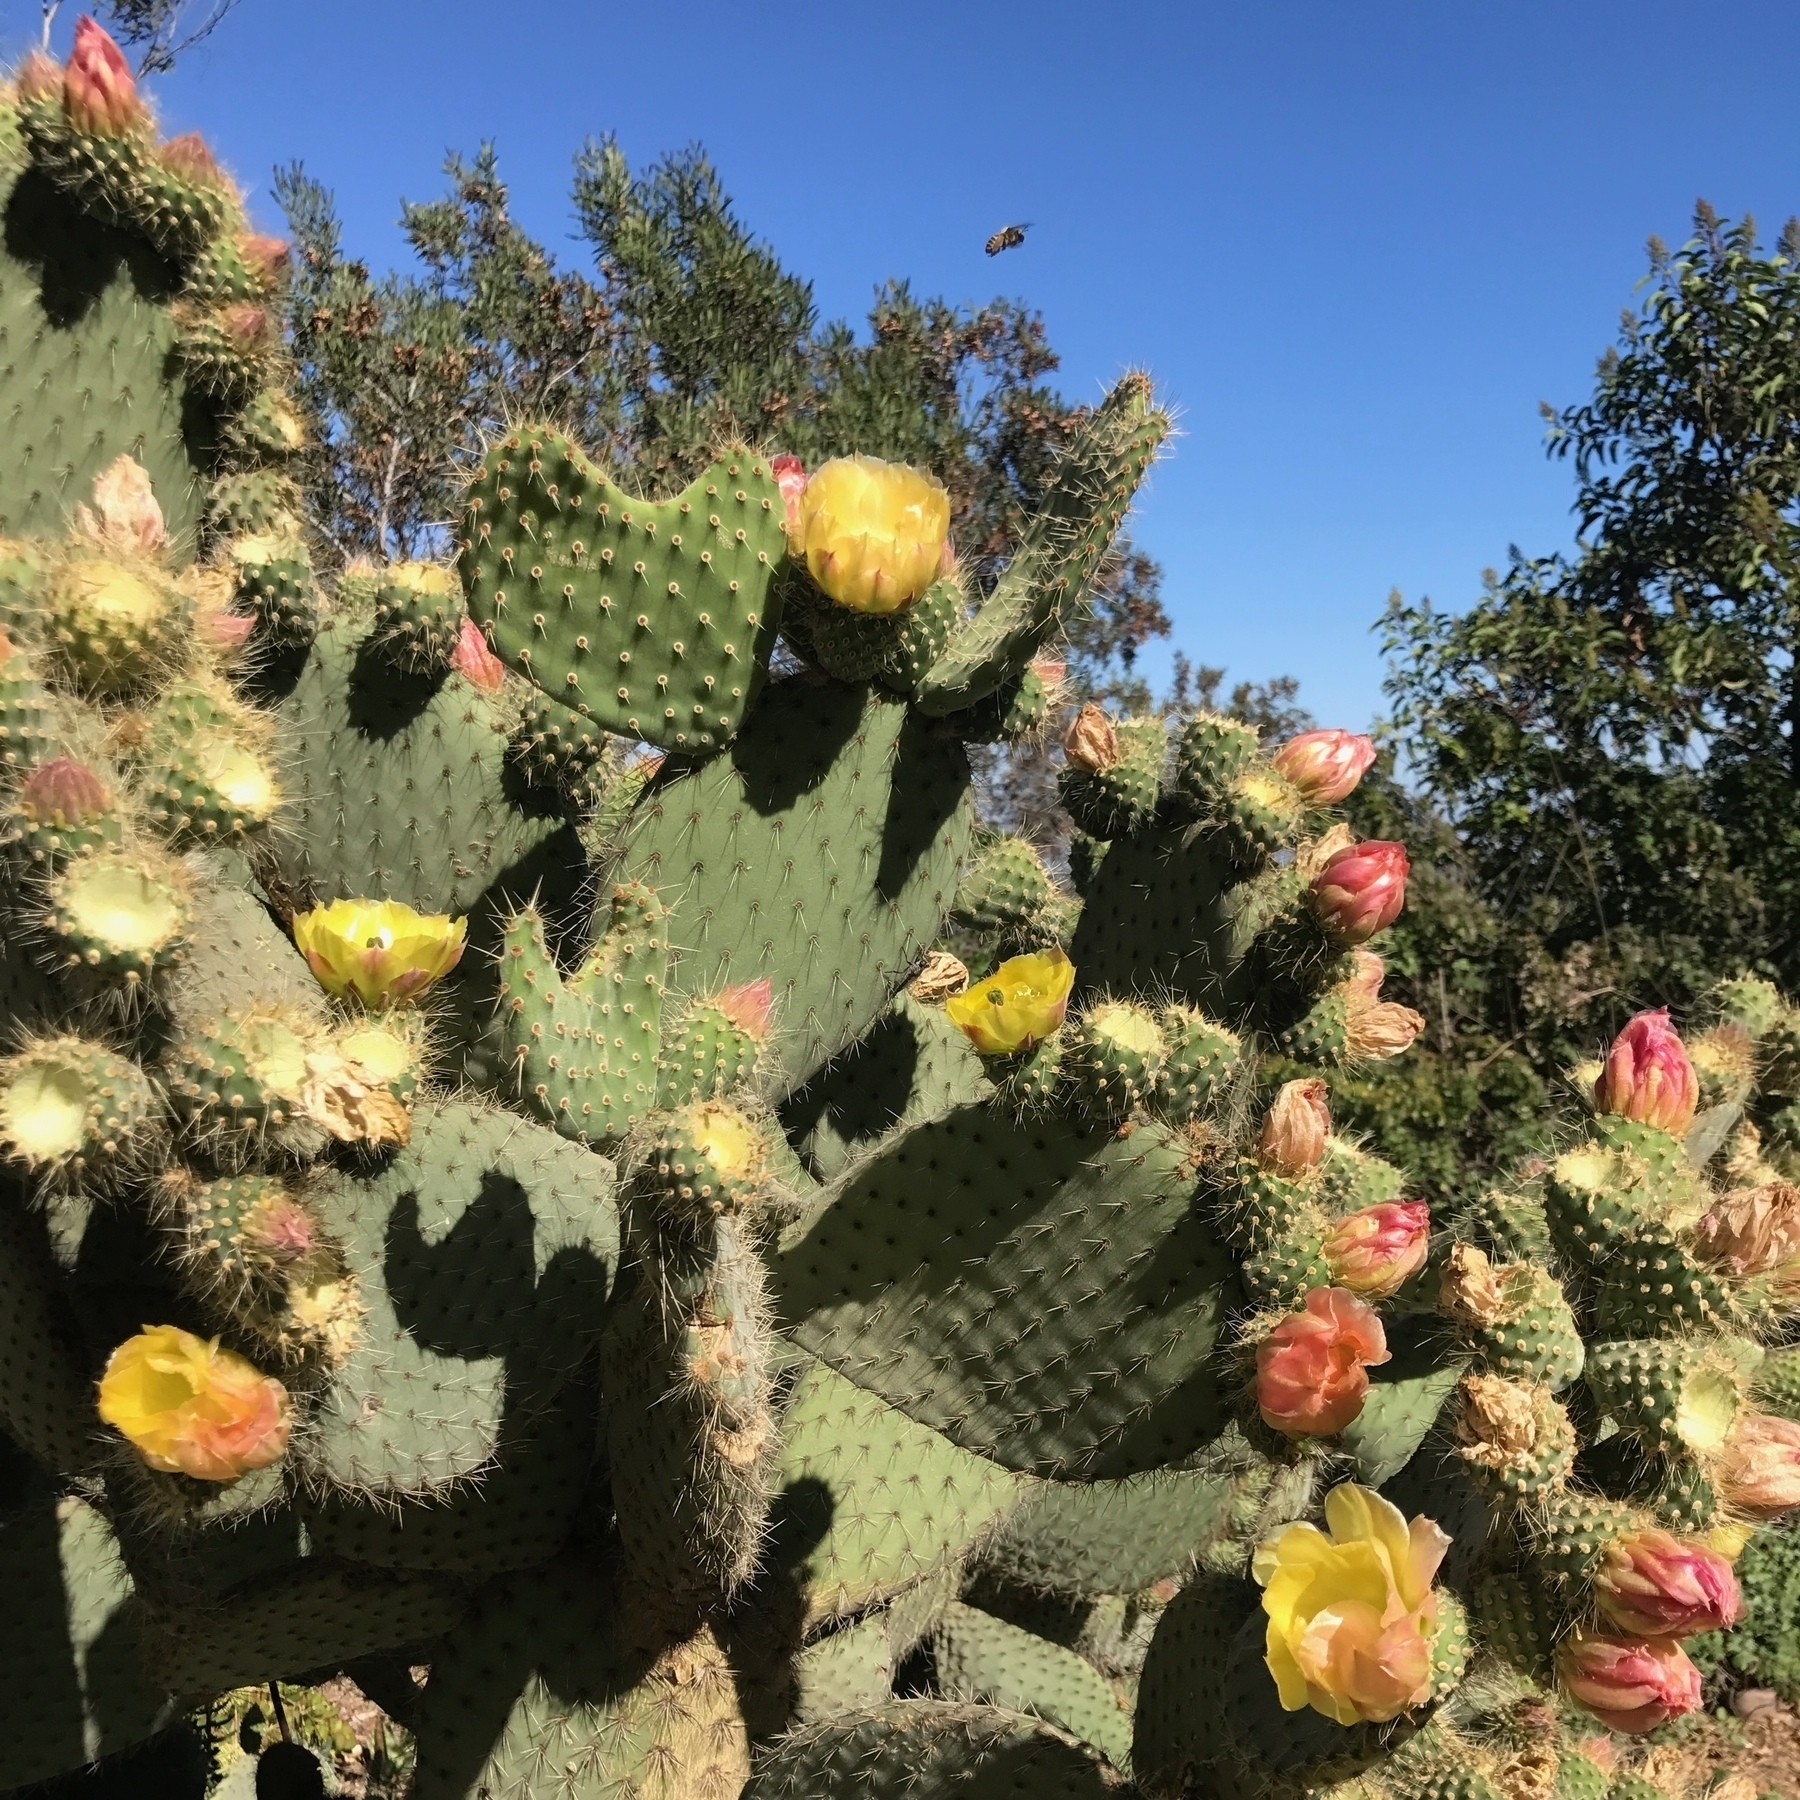 A huge sprawling cactus growing in all directions with yellow and pink flowers all over it. And a bee flying by.